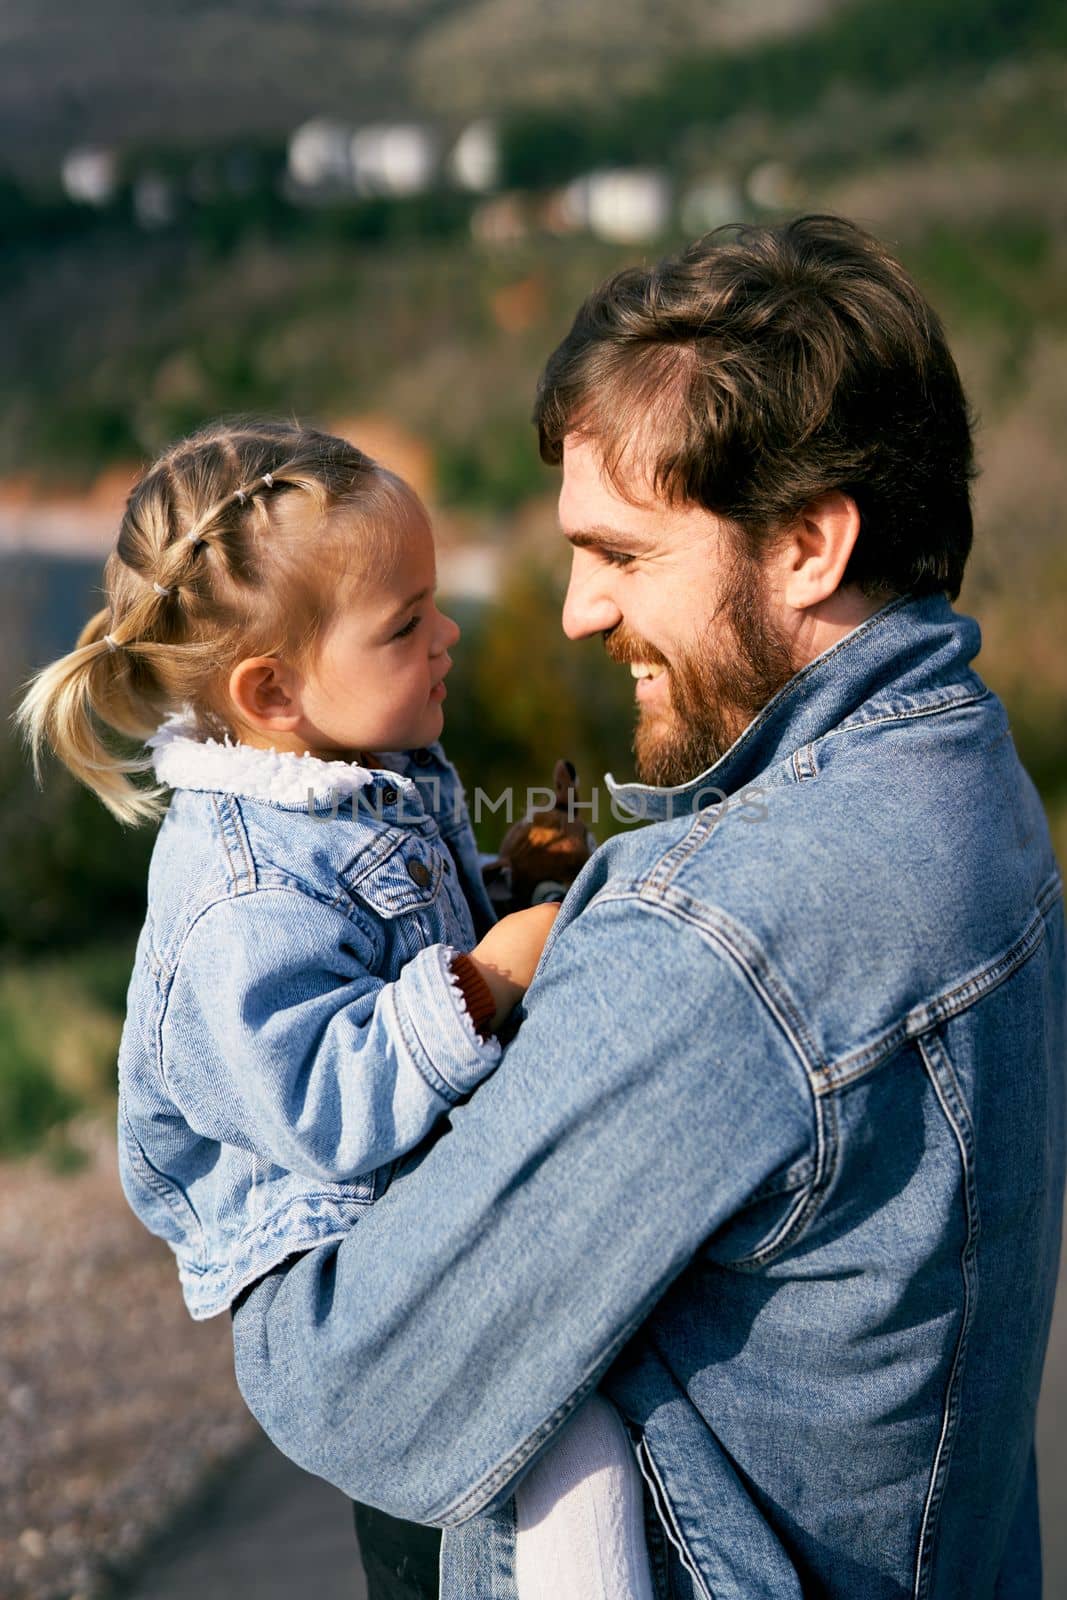 Smiling dad holds a smiling little girl face to face in his arms. Close-up by Nadtochiy